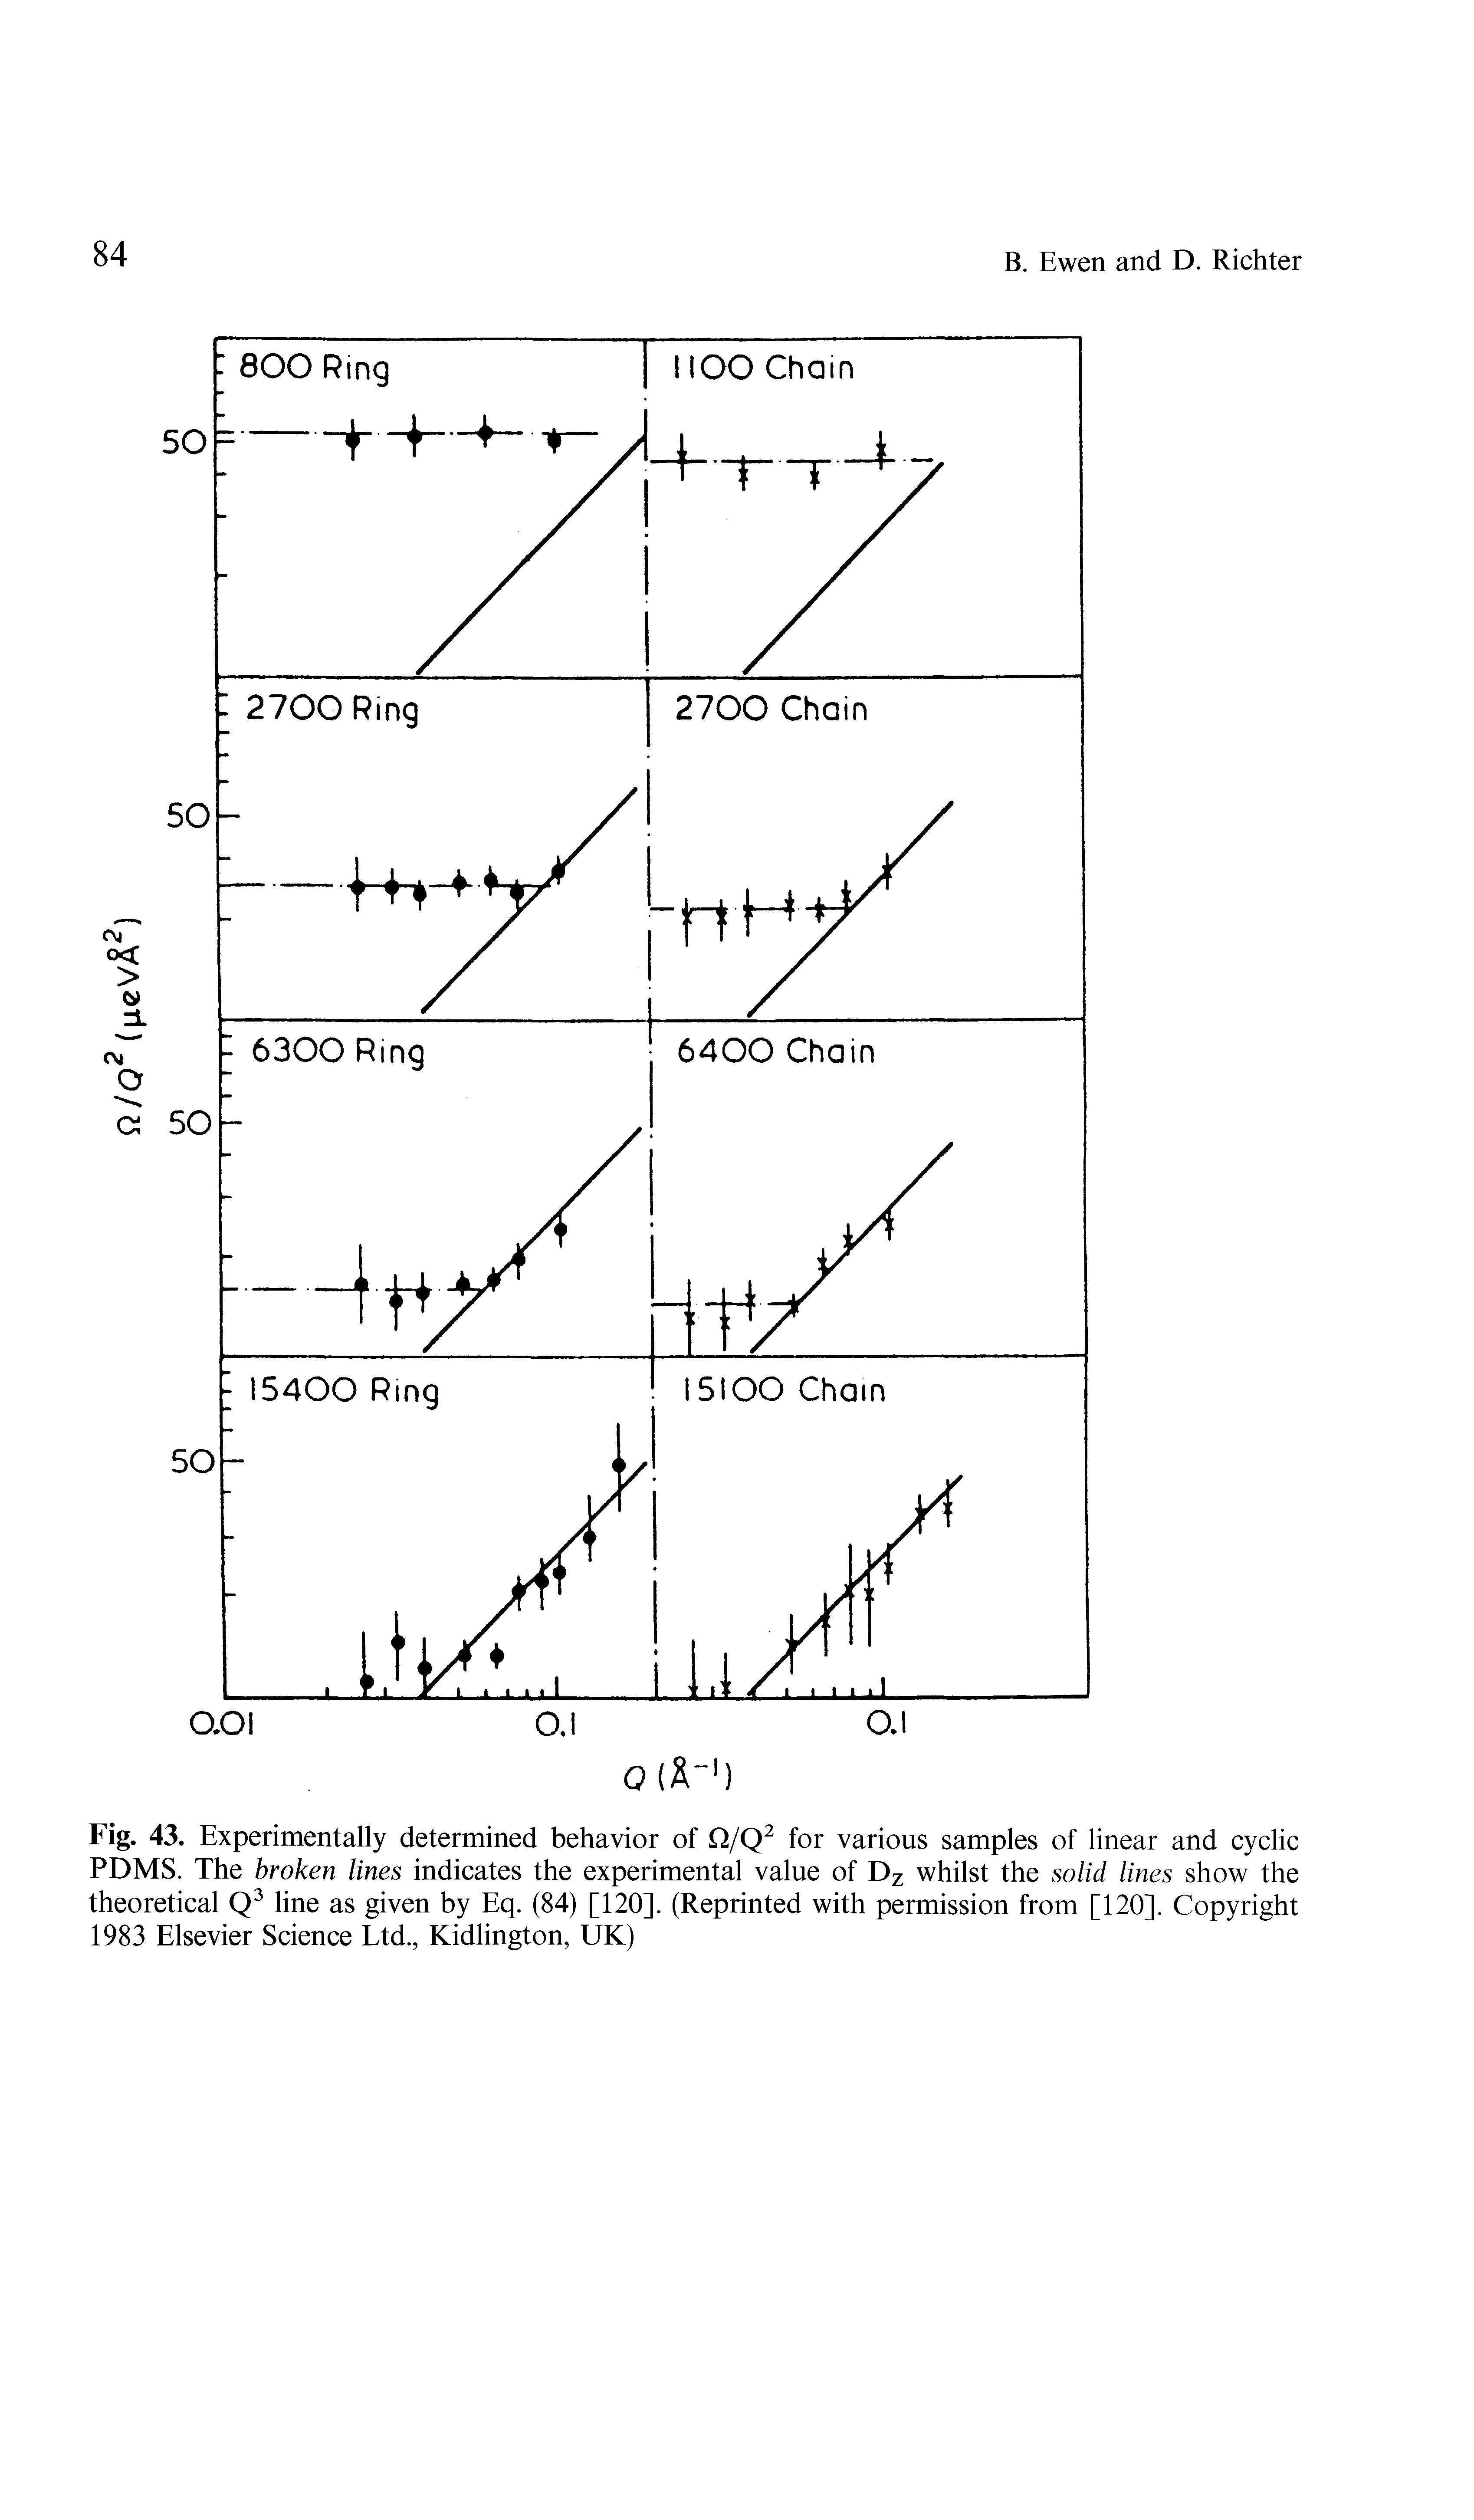 Fig. 43. Experimentally determined behavior of Q/Q2 for various samples of linear and cyclic PDMS. The broken lines indicates the experimental value of Dz whilst the solid lines show the theoretical Q3 line as given by Eq. (84) [120]. (Reprinted with permission from [120]. Copyright 1983 Elsevier Science Ltd., Kidlington, UK)...